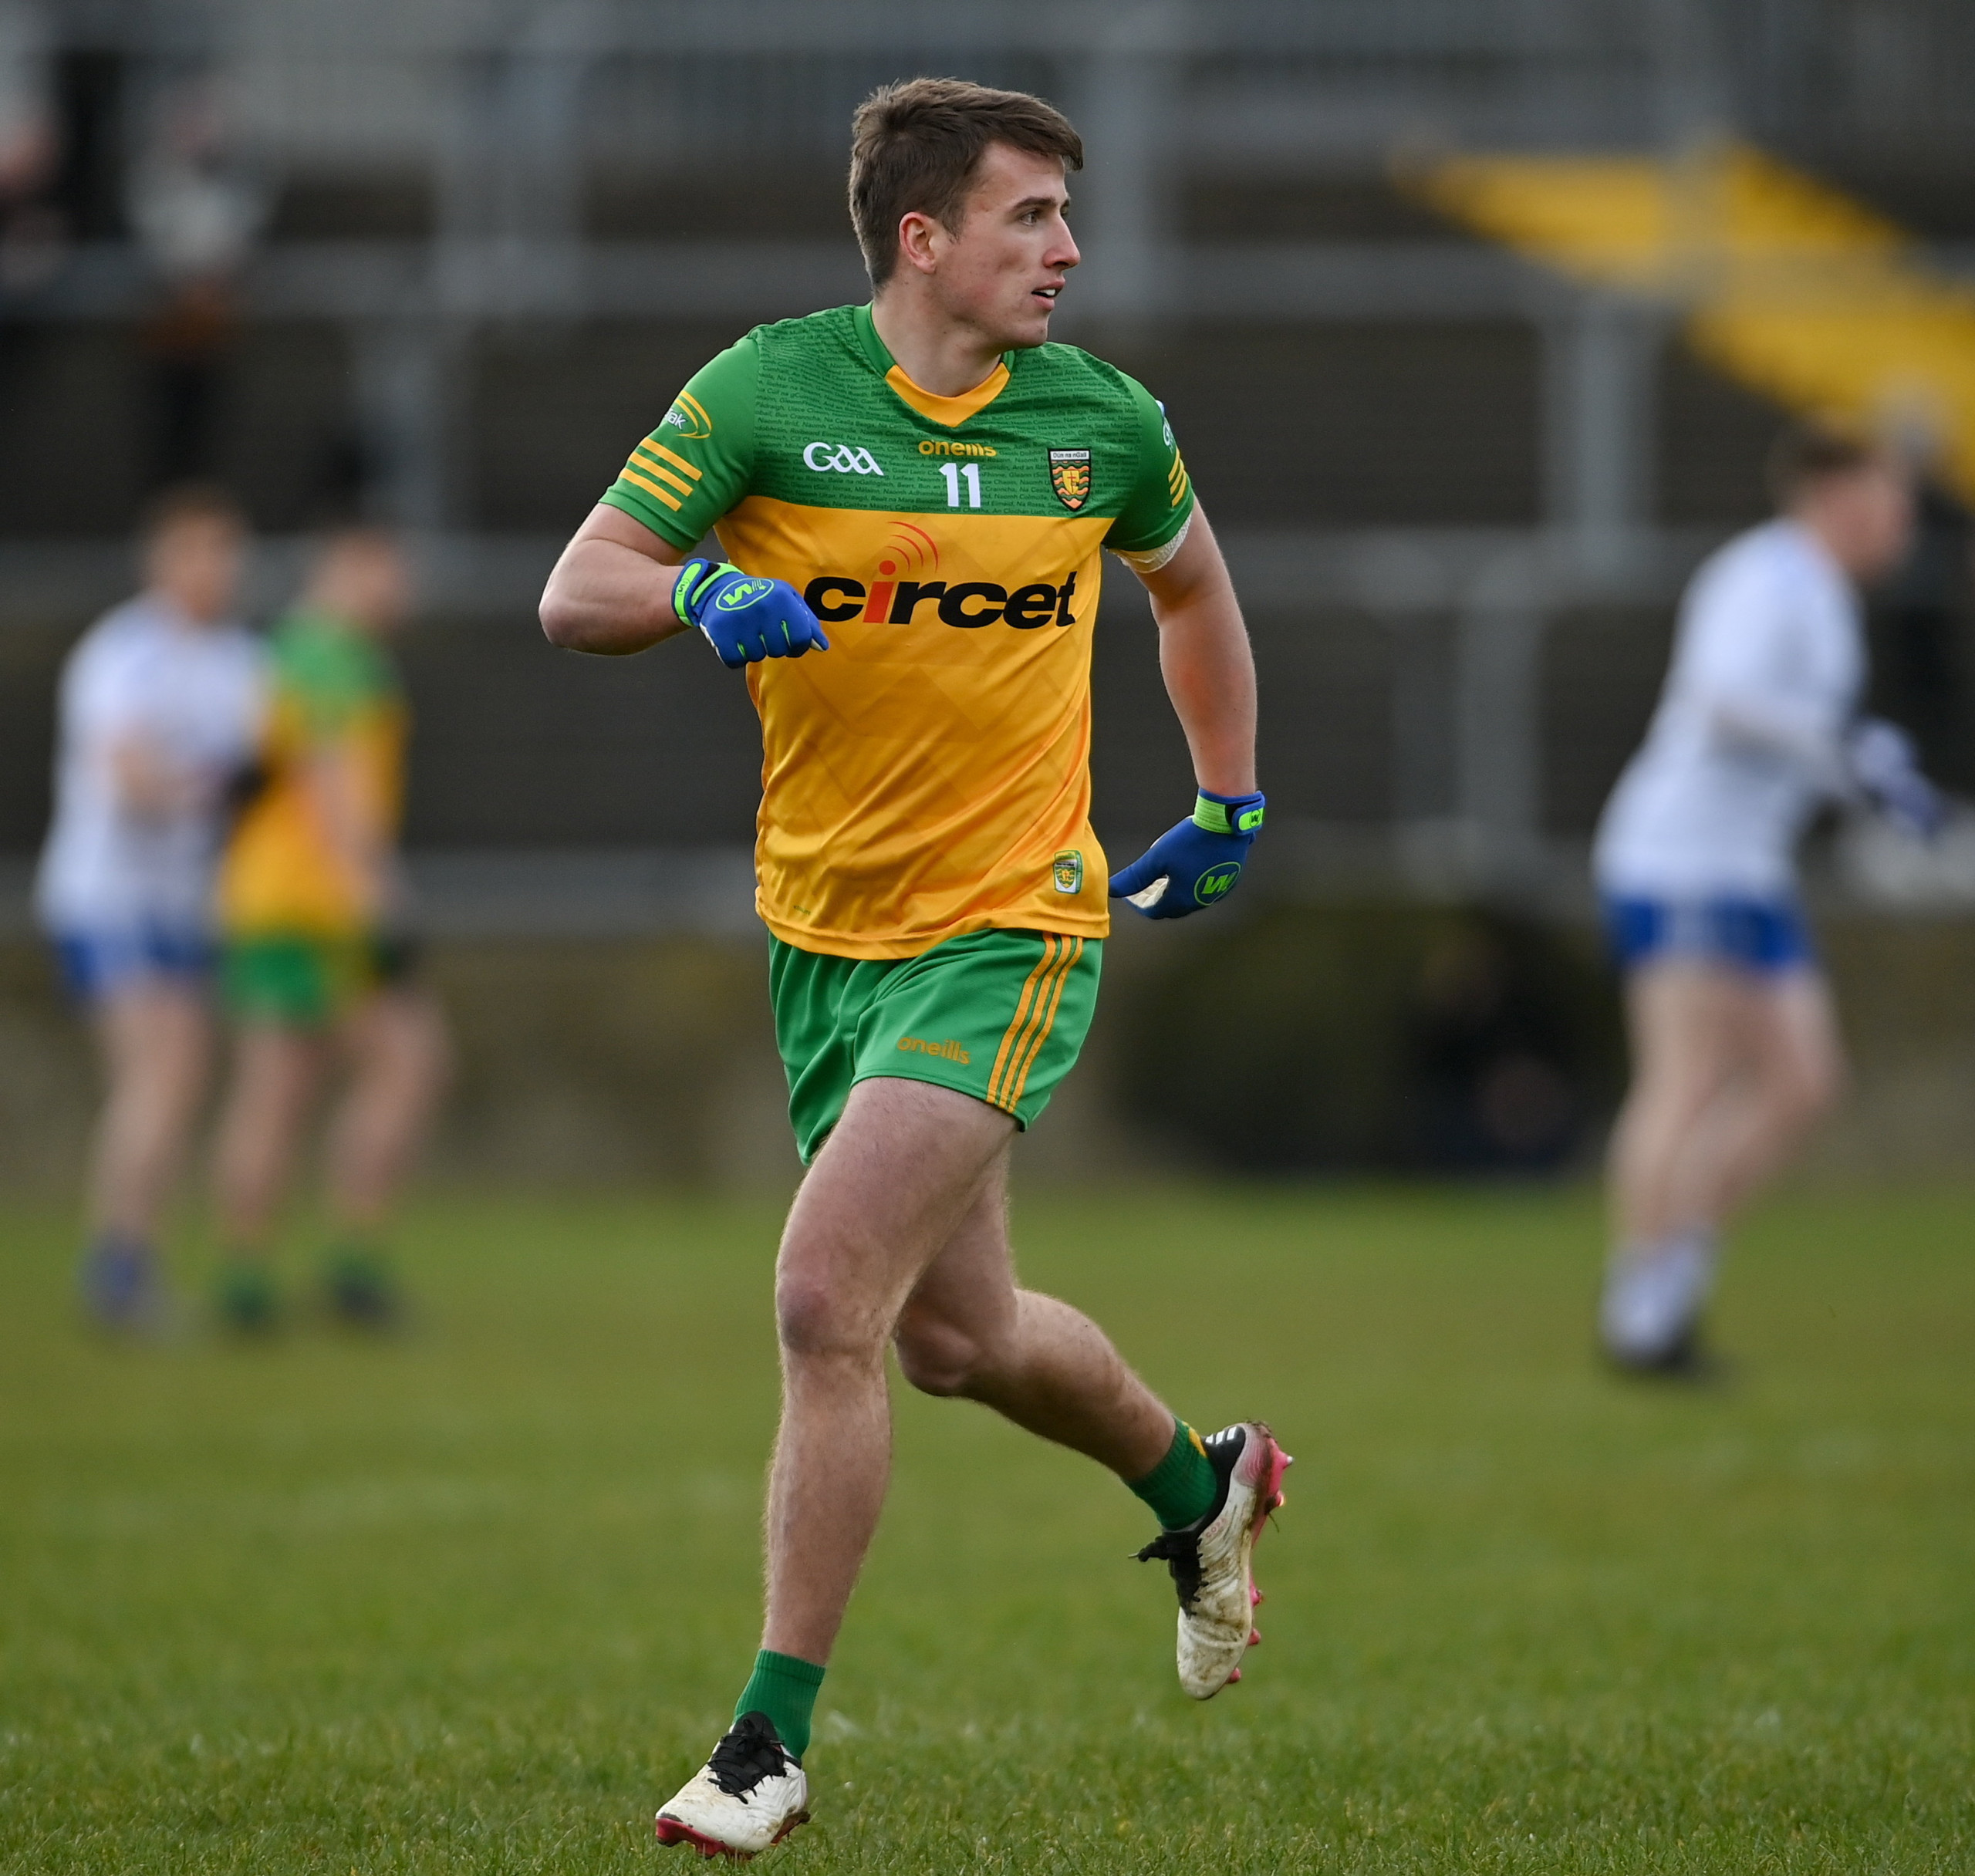 Pivotal Players – Peadar Mogan and Conor Glass